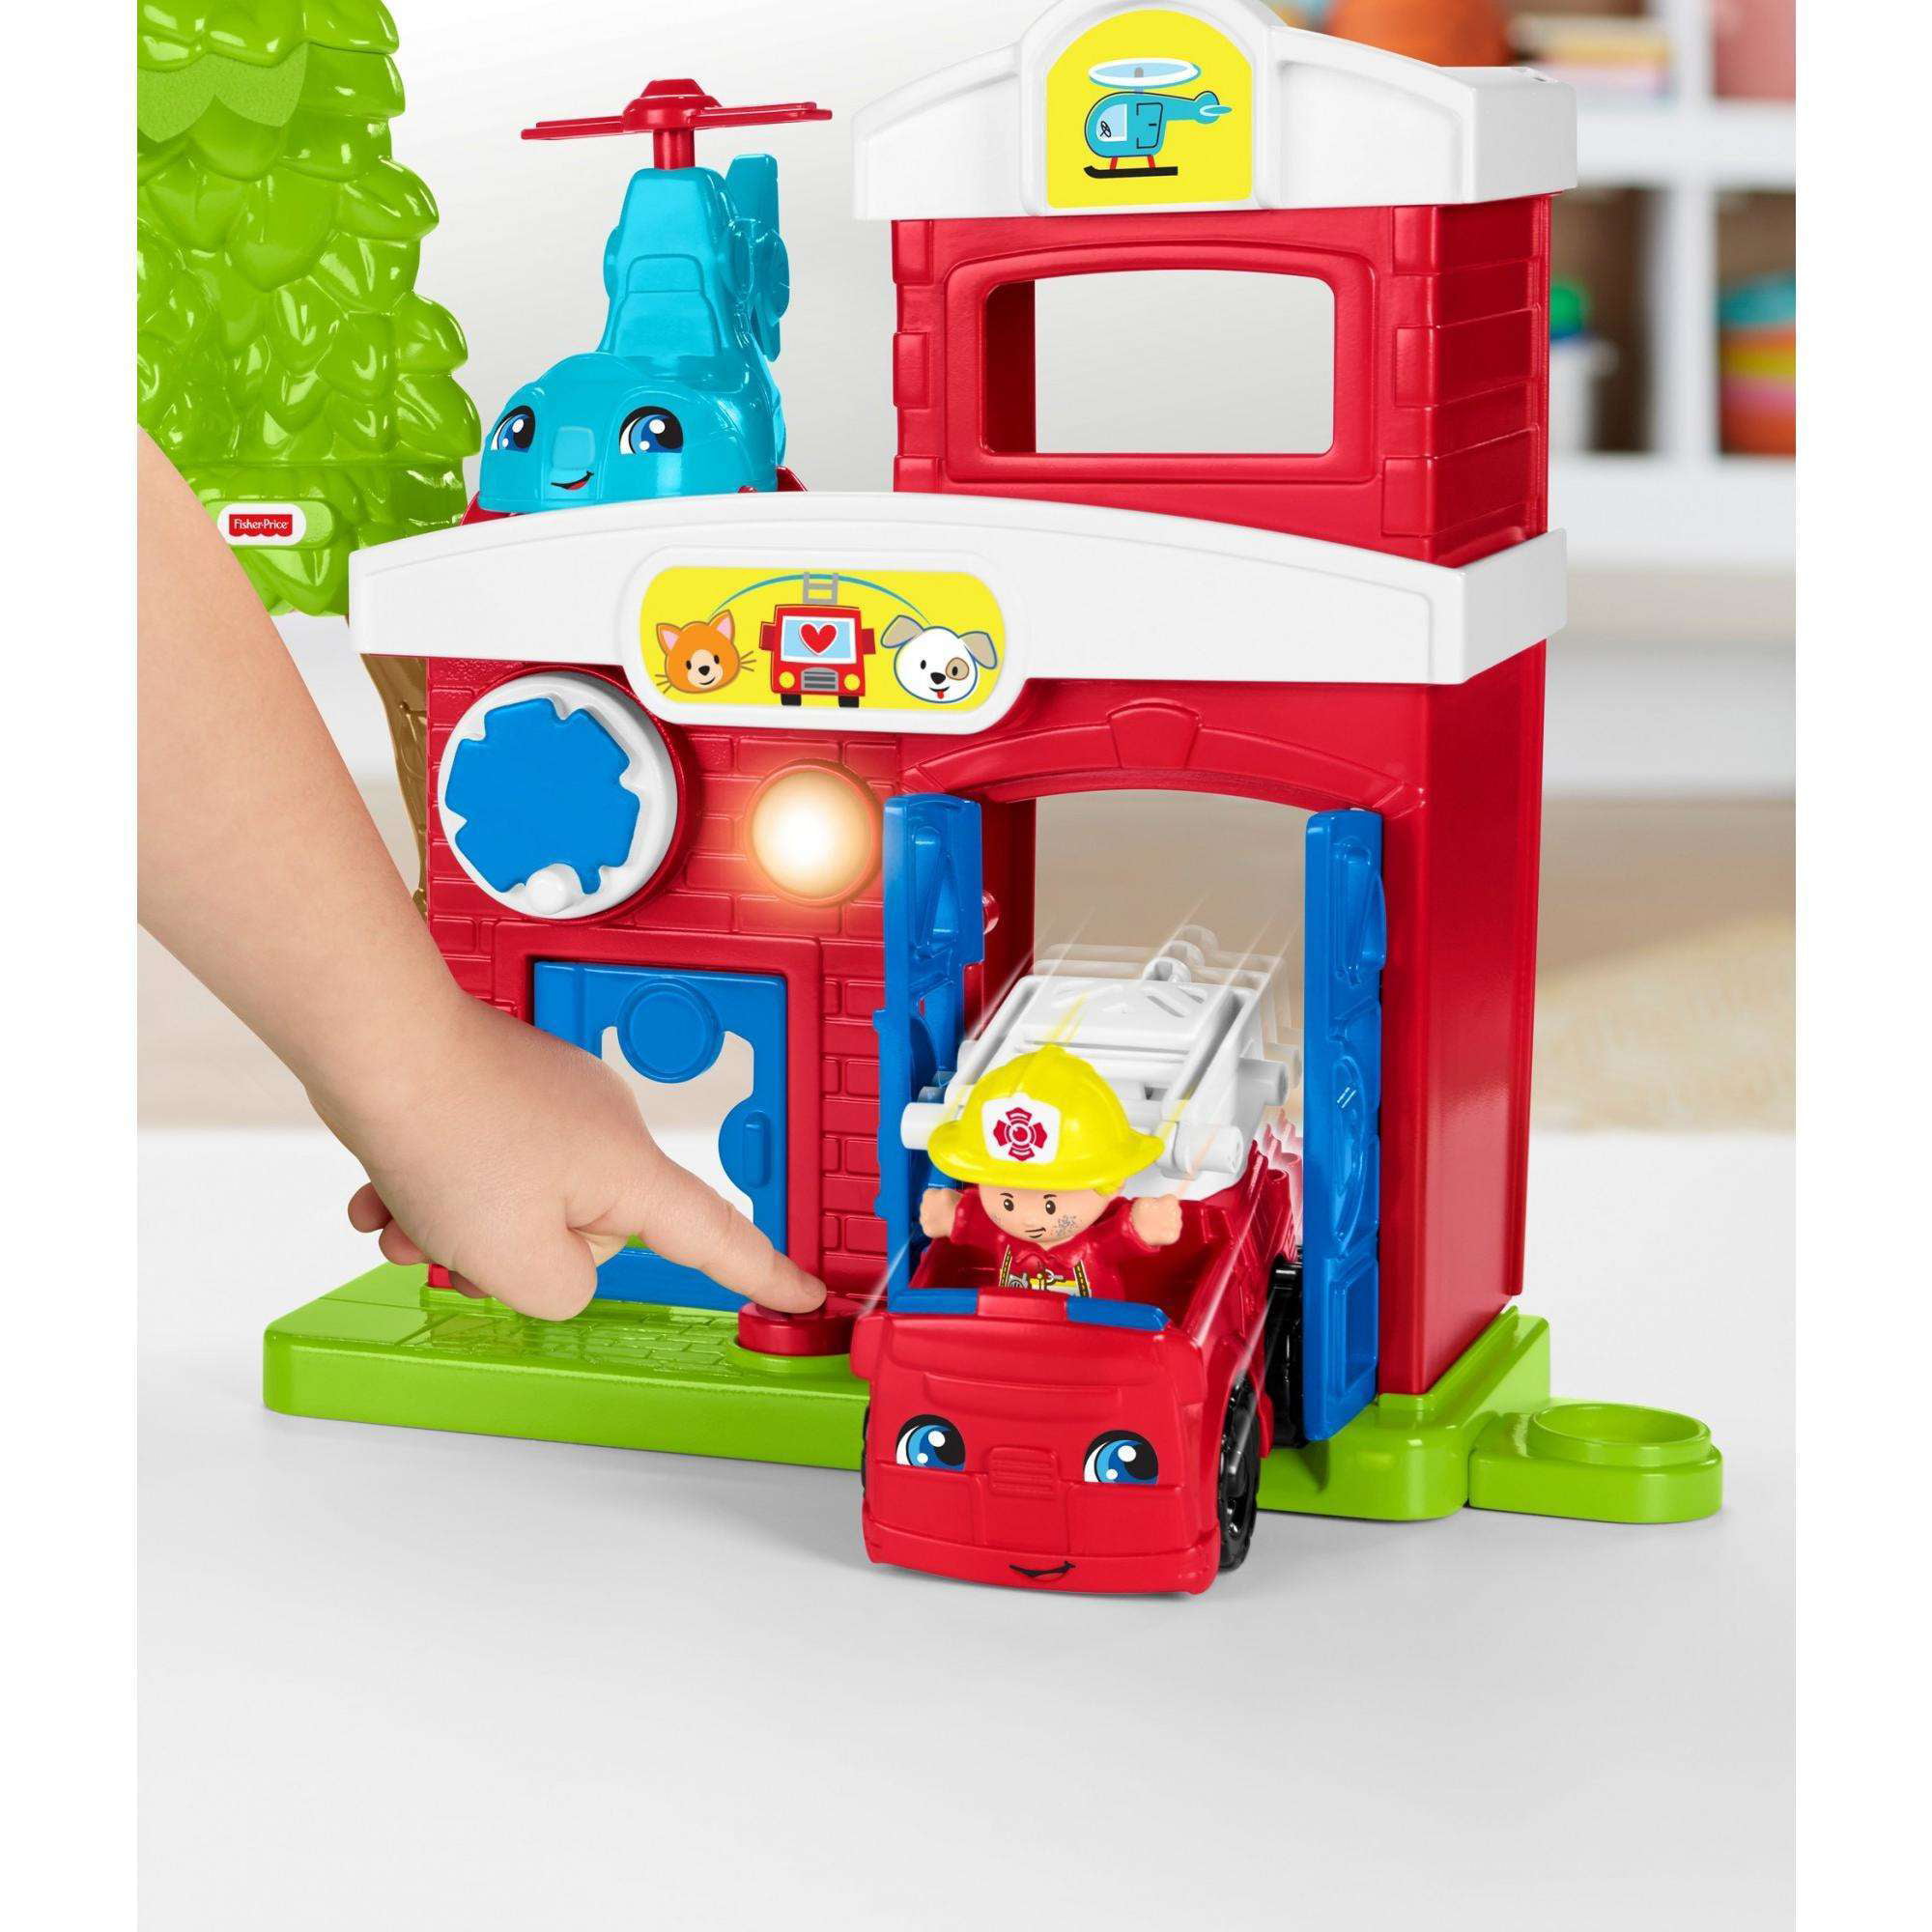 Fisher-Price Little People Animal Rescue Playset - Walmart.com